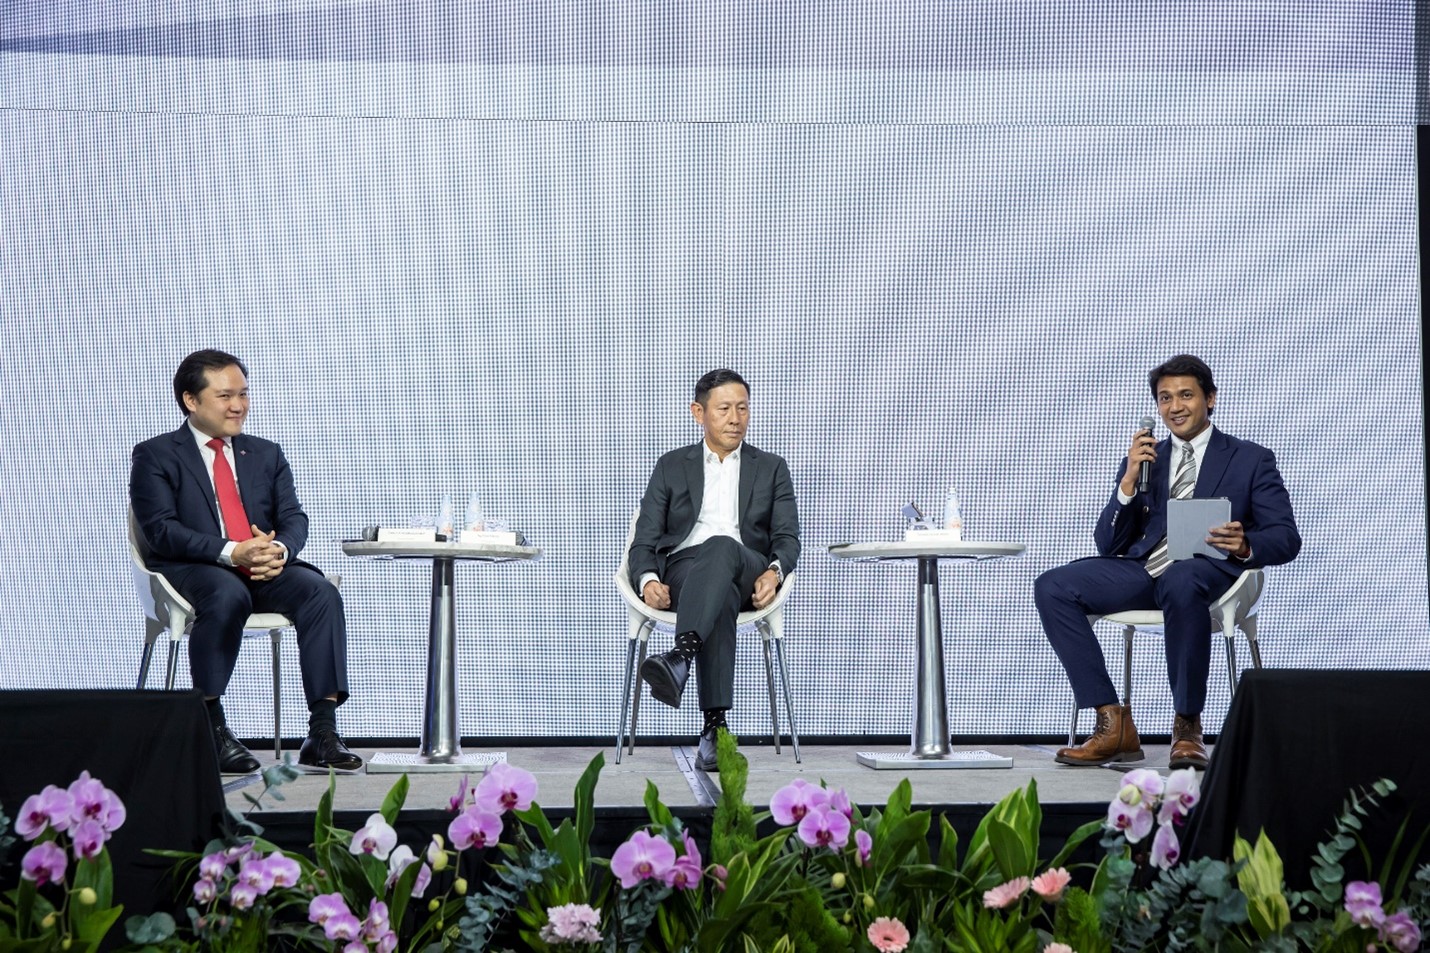 Panote Sirivadhanabhakdi speaking at the 'Purpose Accelerates through the Ecosystem' panel discussion at the Company of Good Summit 2023.